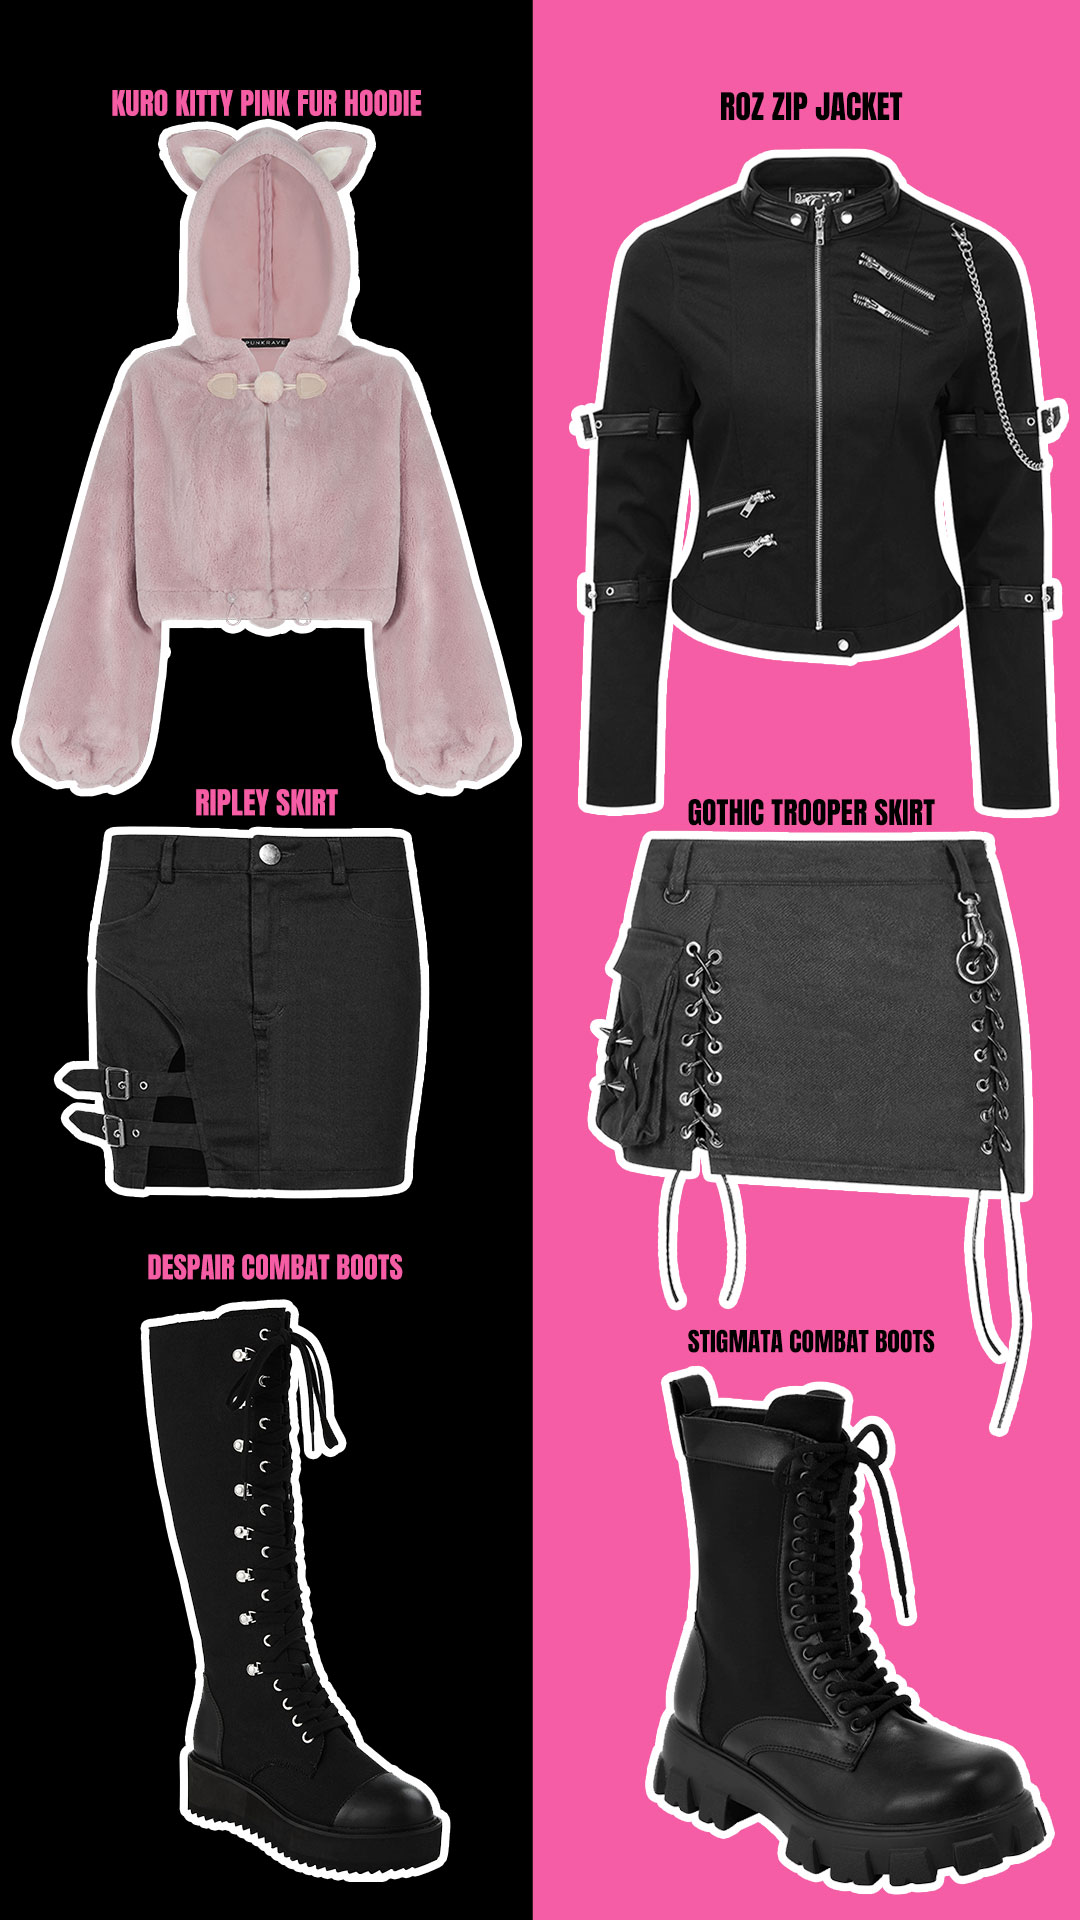 two opposites of styles one is cute pink and the other black dark fit